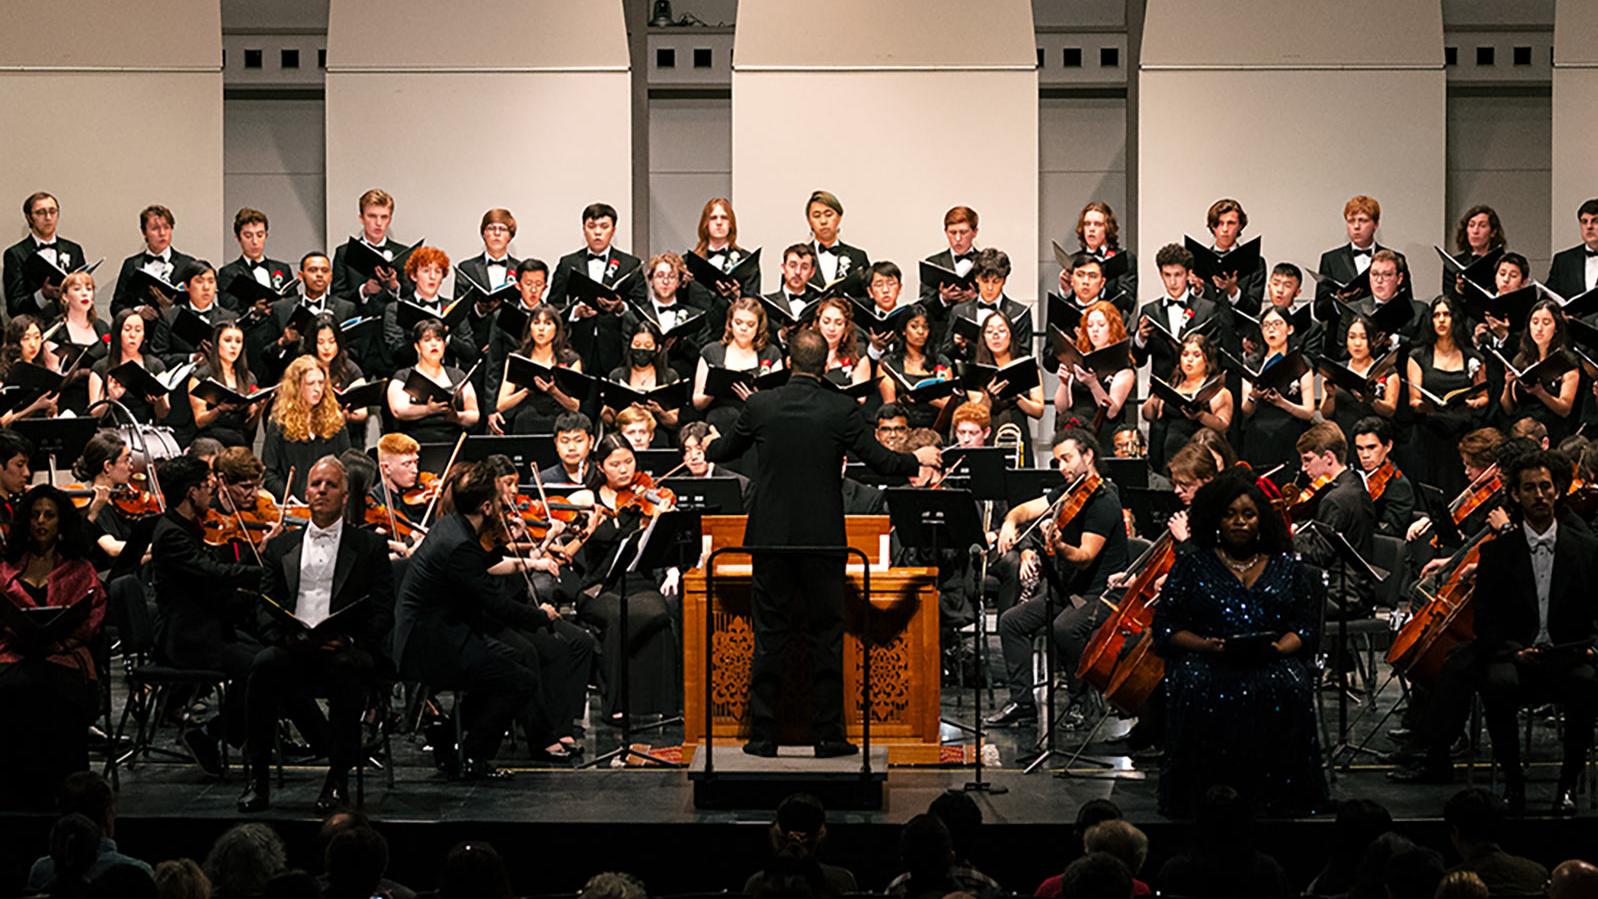 Chorus and orchestra performing onstage